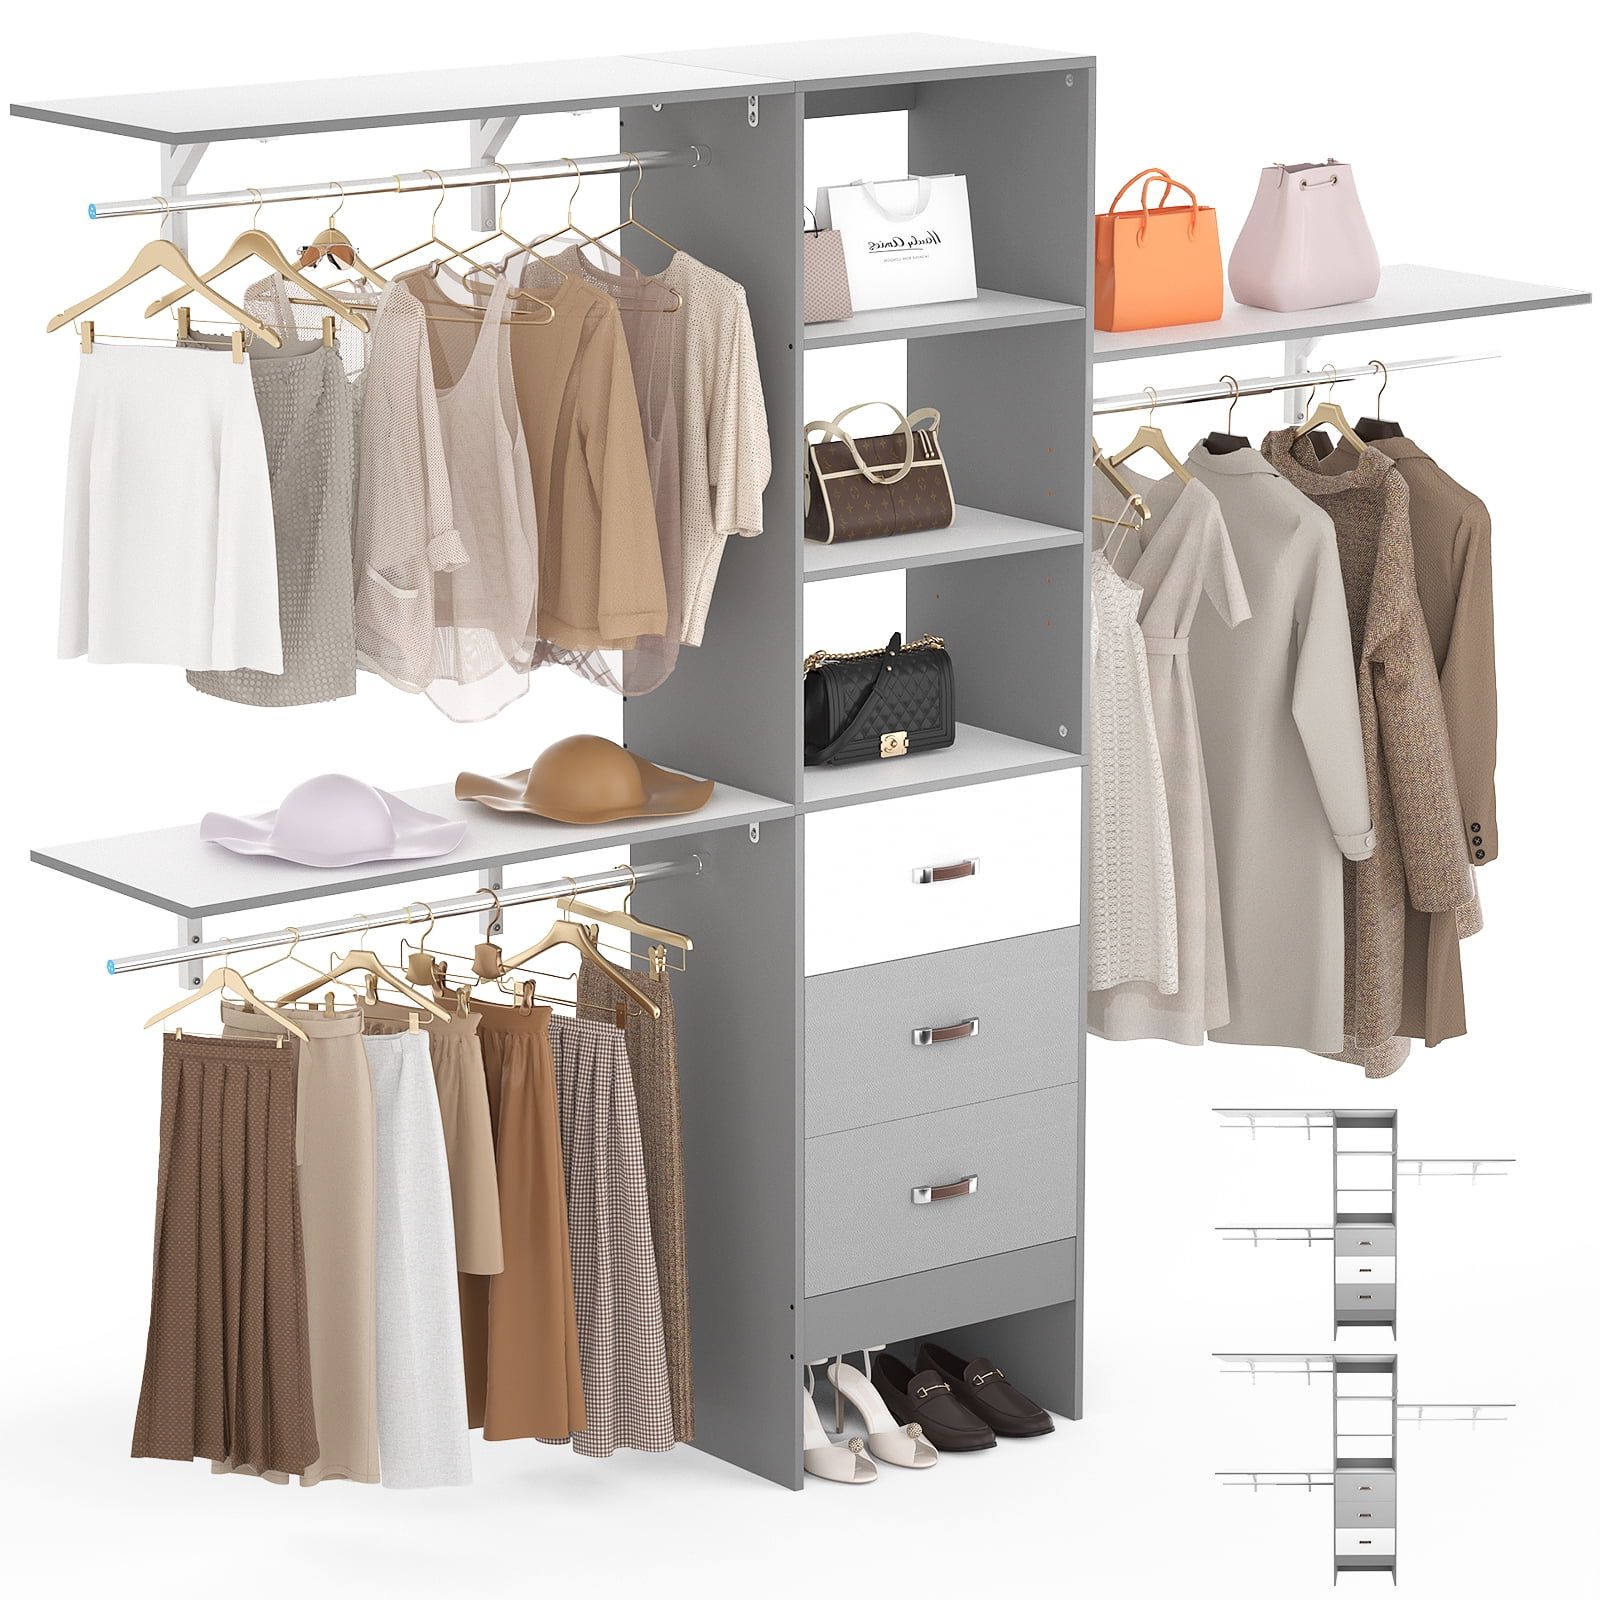 96 Inches Wardrobes With Favorite Homieasy 96 Inches Closet System, 8ft Walk In Closet Organizer With 3  Shelving Towers, Heavy Duty Clothes Rack With 3 Drawers, Built In Garment  Rack, 96" L X 16" W X 75" H, (Photo 4 of 10)